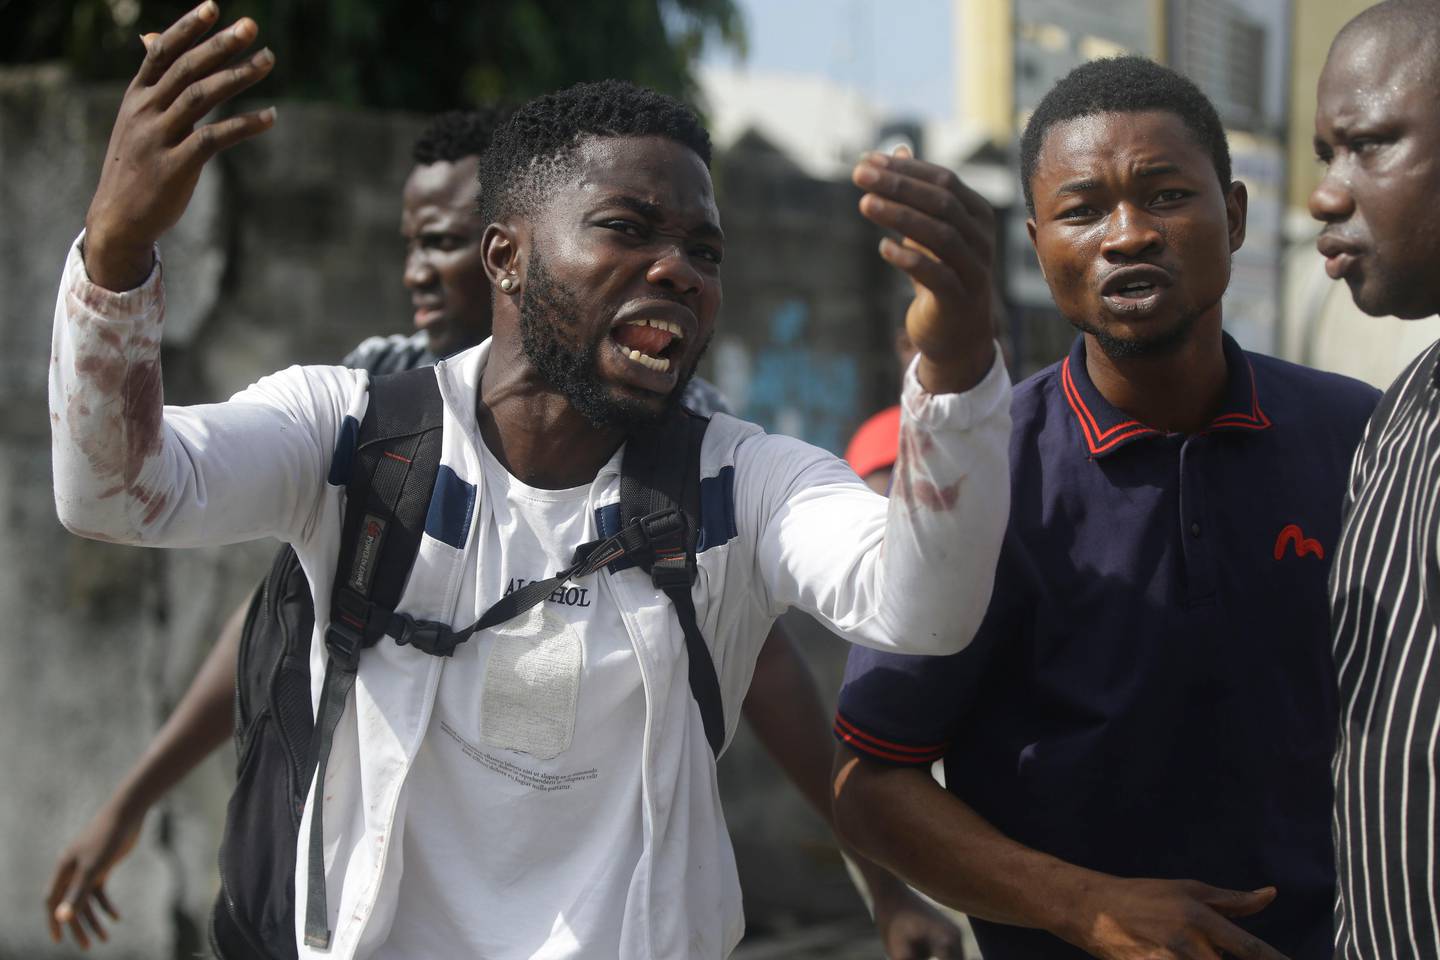 Alister, a protester who says his brother Emeka died from a stray bullet from the Army, reacts while speaking to Associated Press near Lekki toll gate in Lagos, Nigeria, Tuesday Oct. 20, 2020.  After 13 days of protests against alleged police brutality, authorities have imposed a 24-hour curfew in Lagos, Nigeria's largest city, as moves are made to stop growing violence. ( AP Photo/Sunday Alamba)